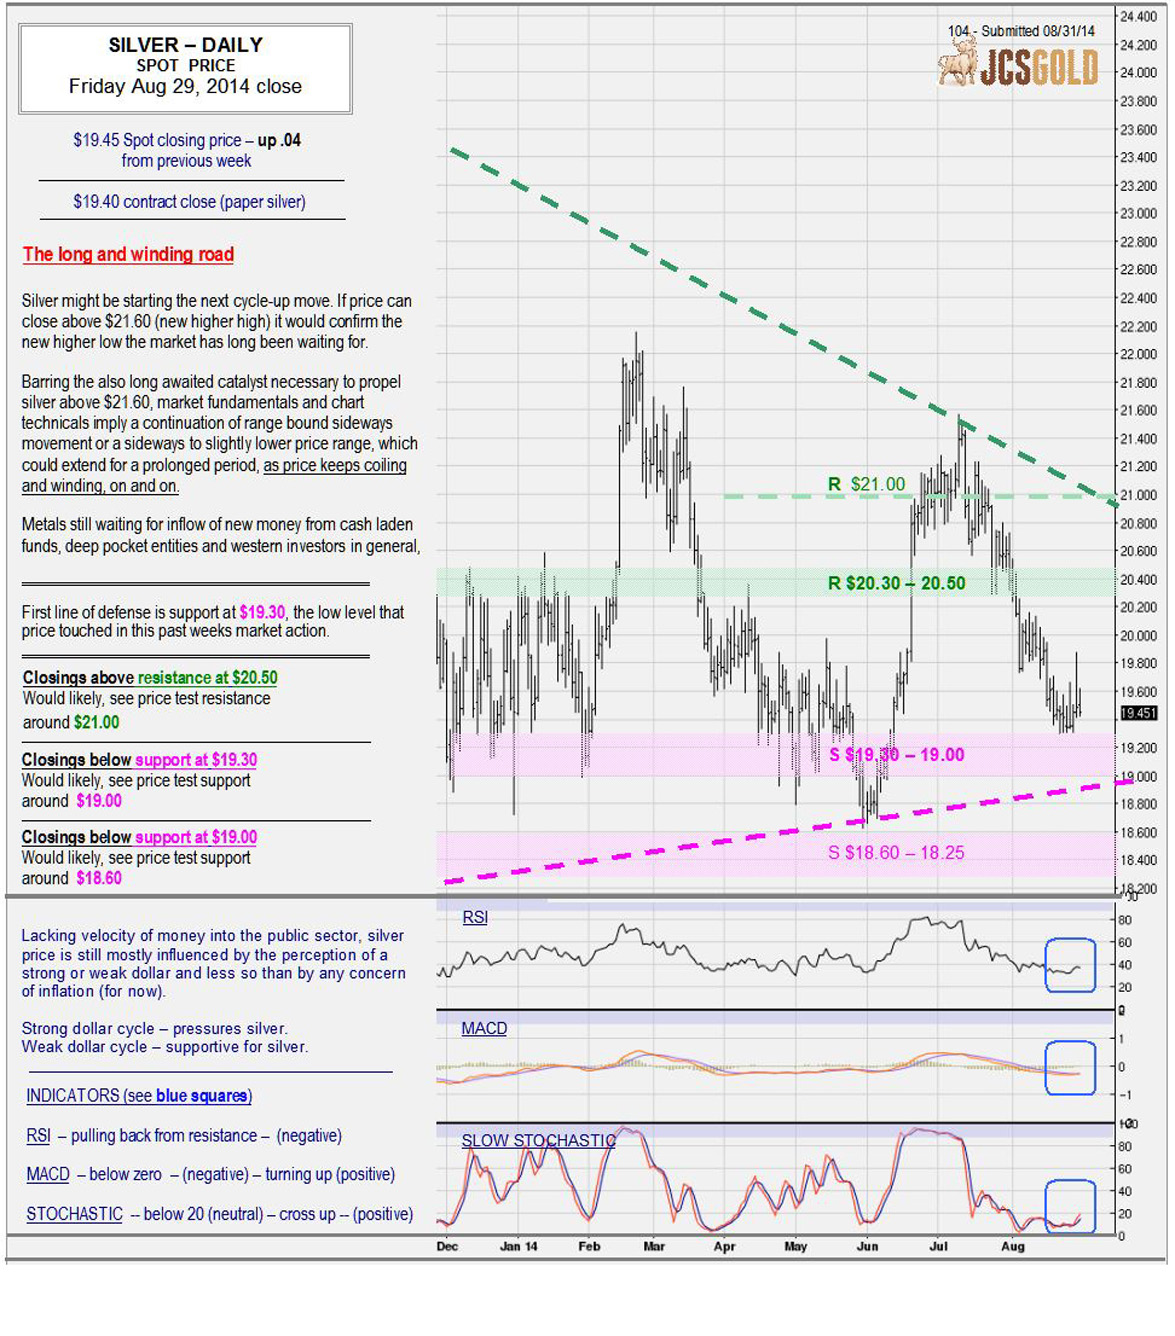 Aug 29, 2014 chart & commentary